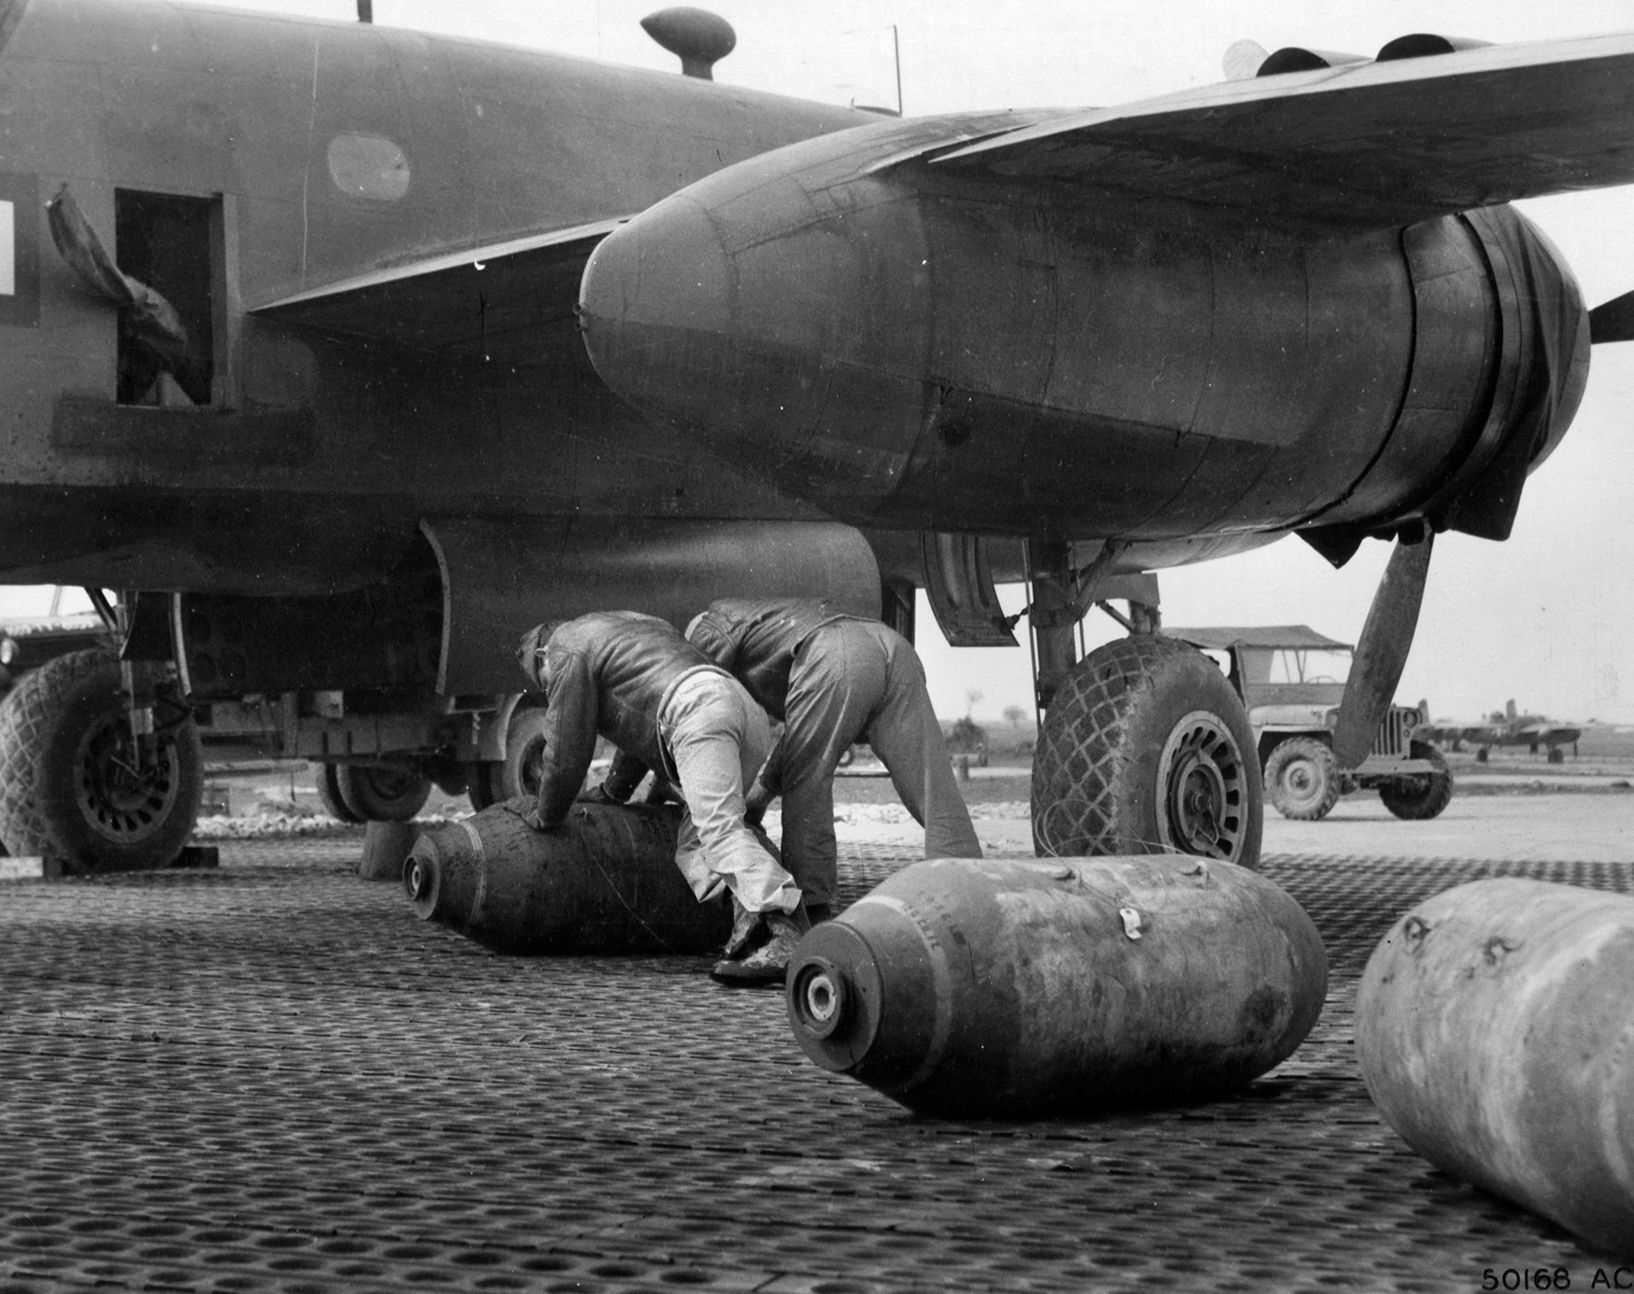 Ground crewmen roll a 1,000-pound bomb under the wing of a B-25 Mitchell bomber prior to lifting it into the bomb bay for a mission in Italy. The B-25s of the U.S. Twelfth Air Force provided extensive support for ground troops as they interdicted enemy supply routes along railroads and roadways in northern Italy.